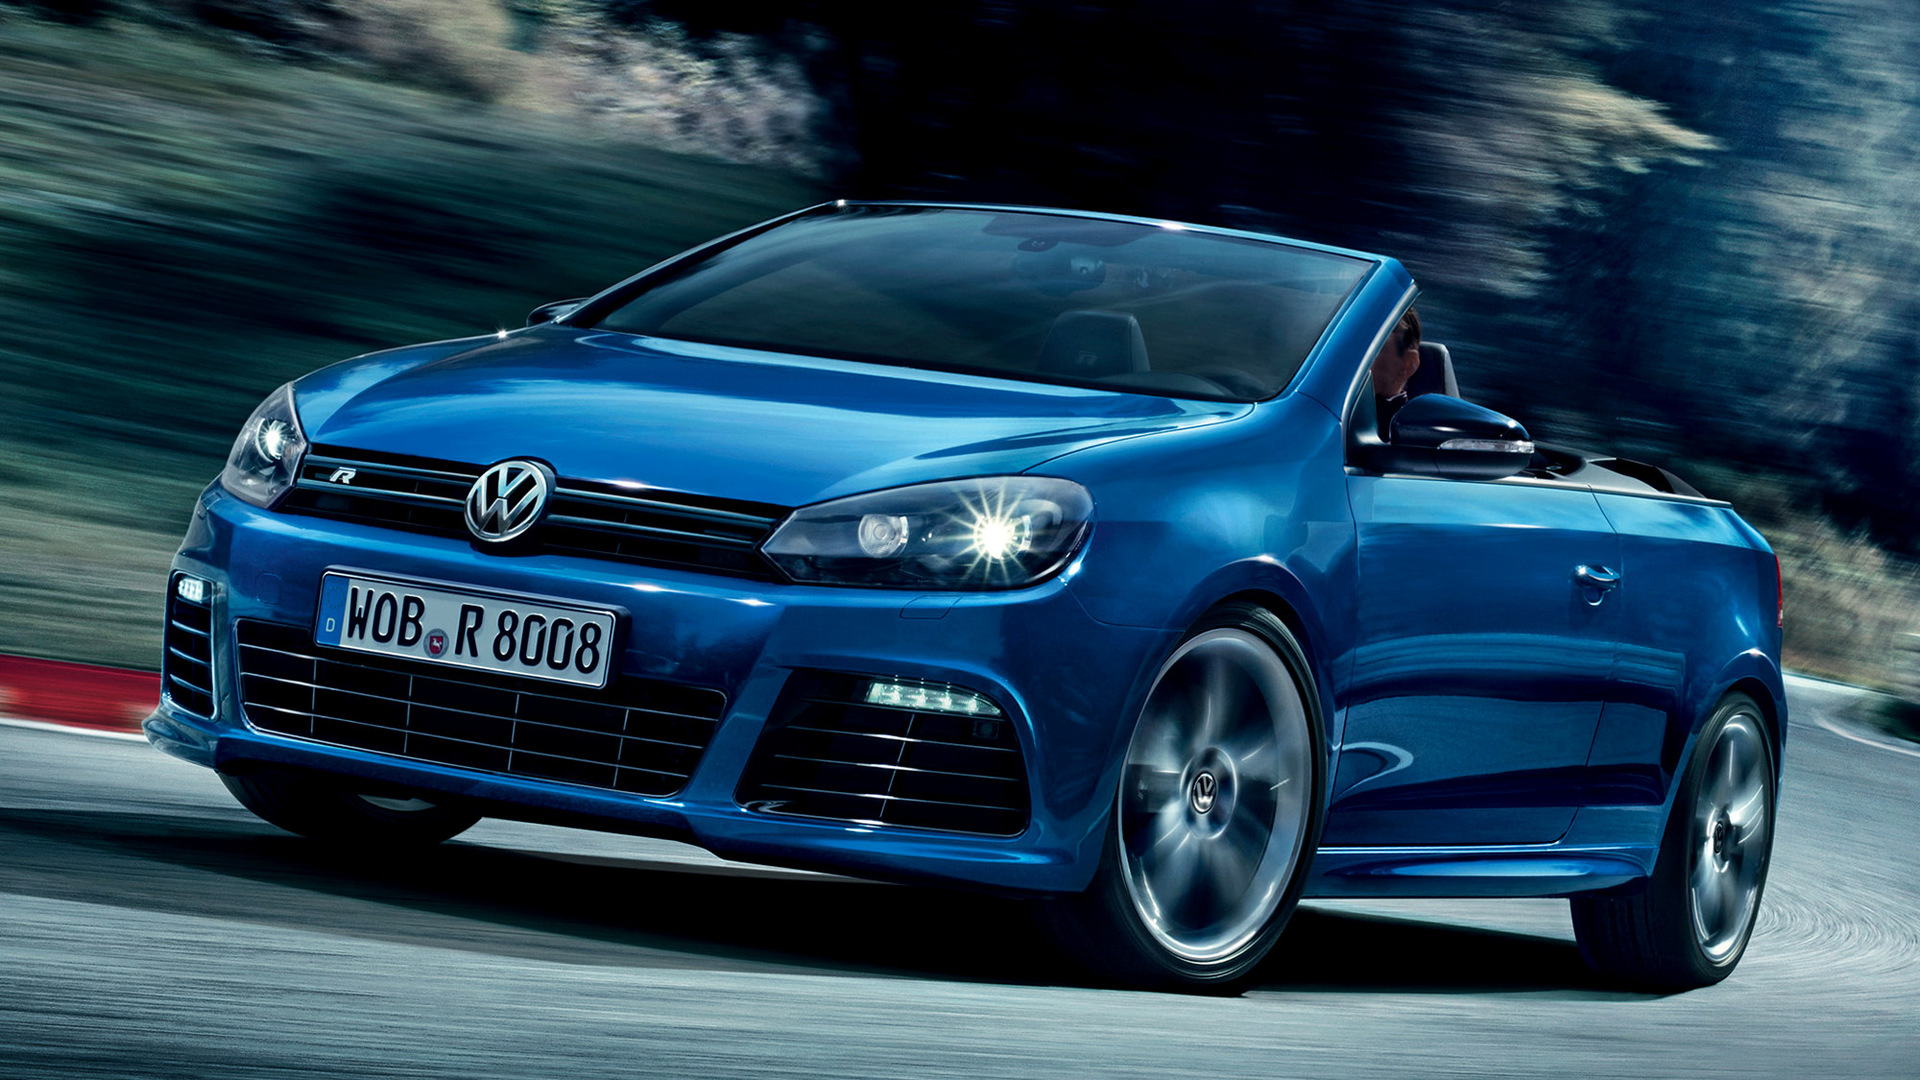 Volkswagen Golf R Cabriolet 2013 Wallpapers and HD Images